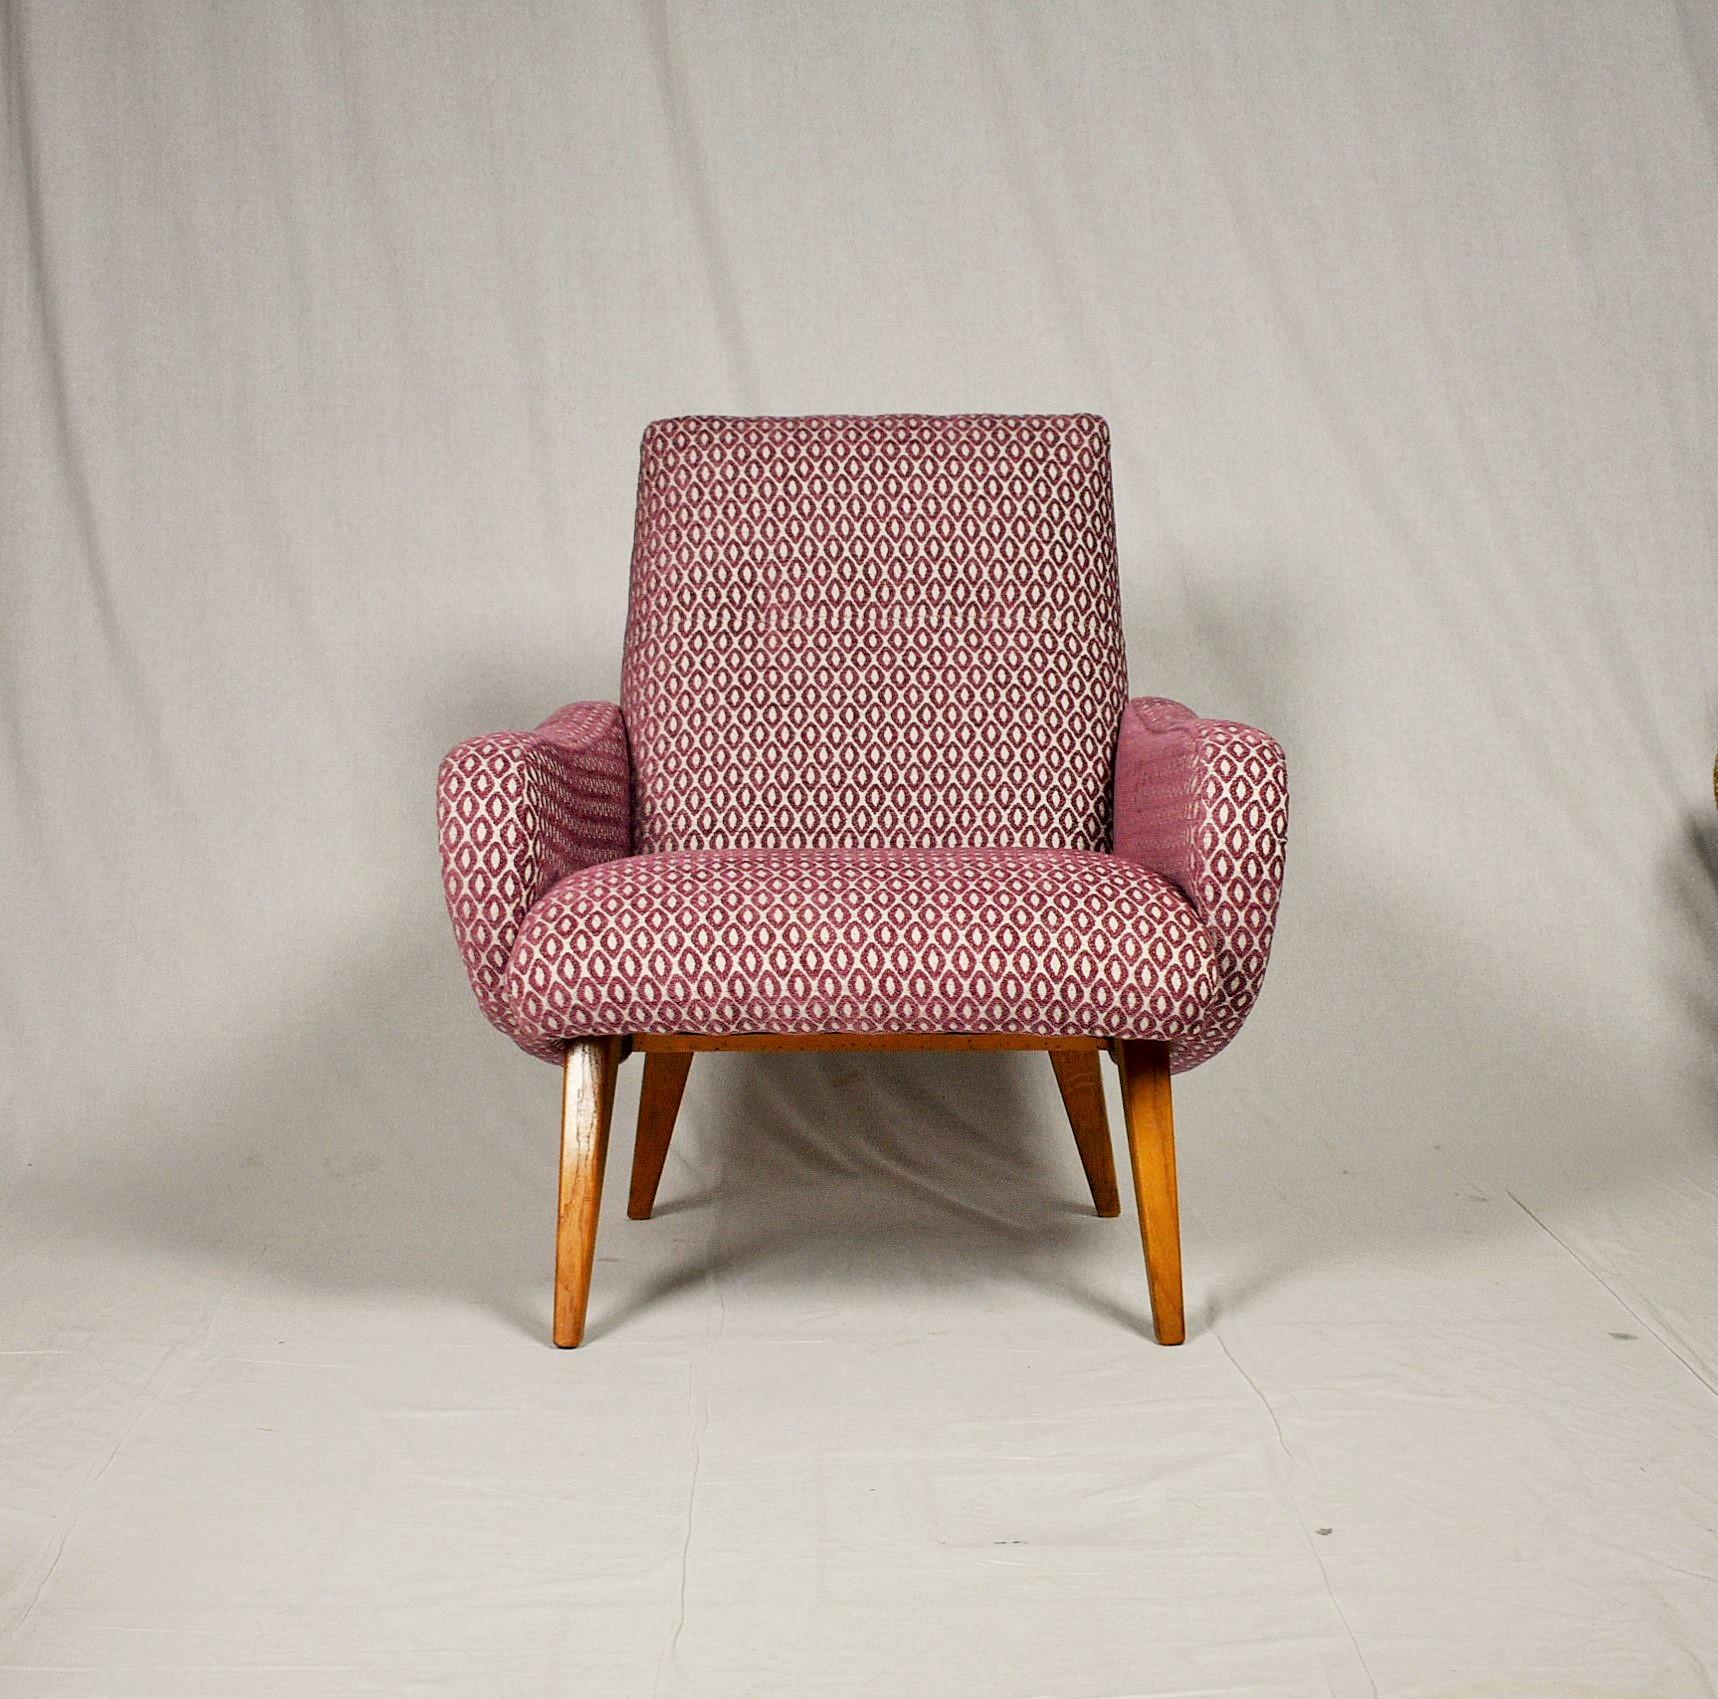 Other 'Lady Chair' in Style of Marco Zanuso, 1960s